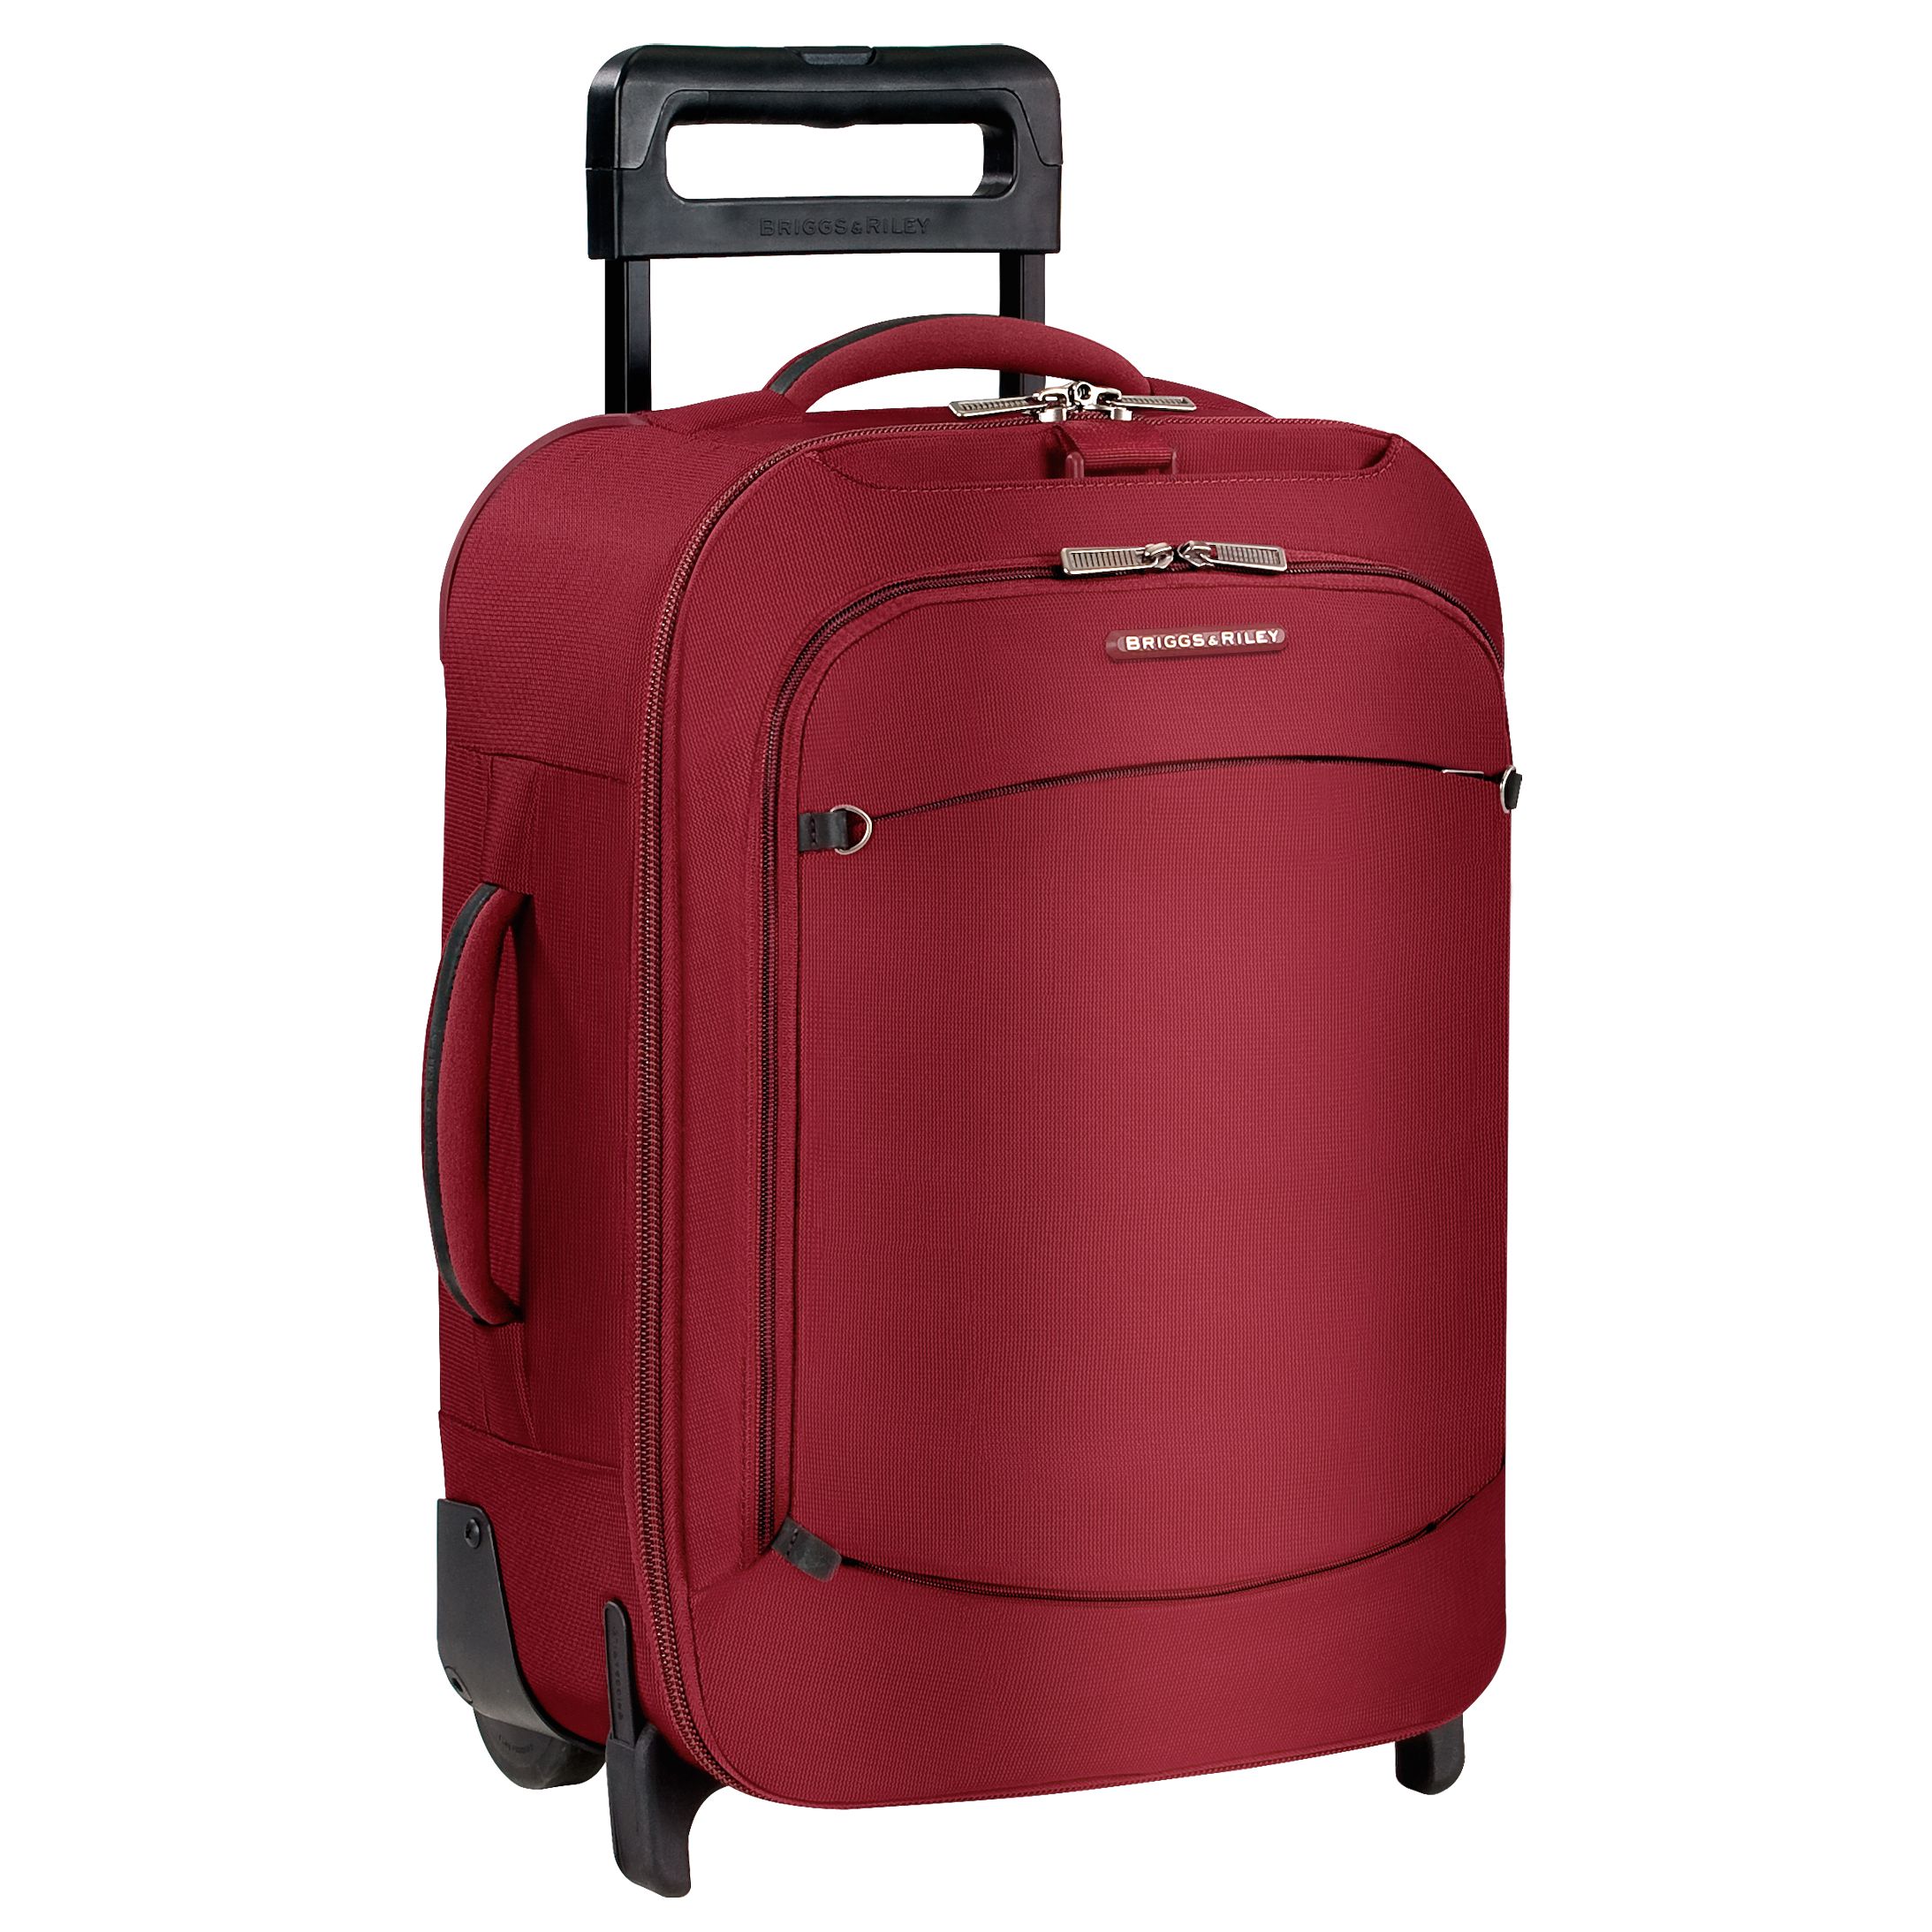 Briggs & Riley Wheeled Upright Carry-On Bag, Sunset at John Lewis